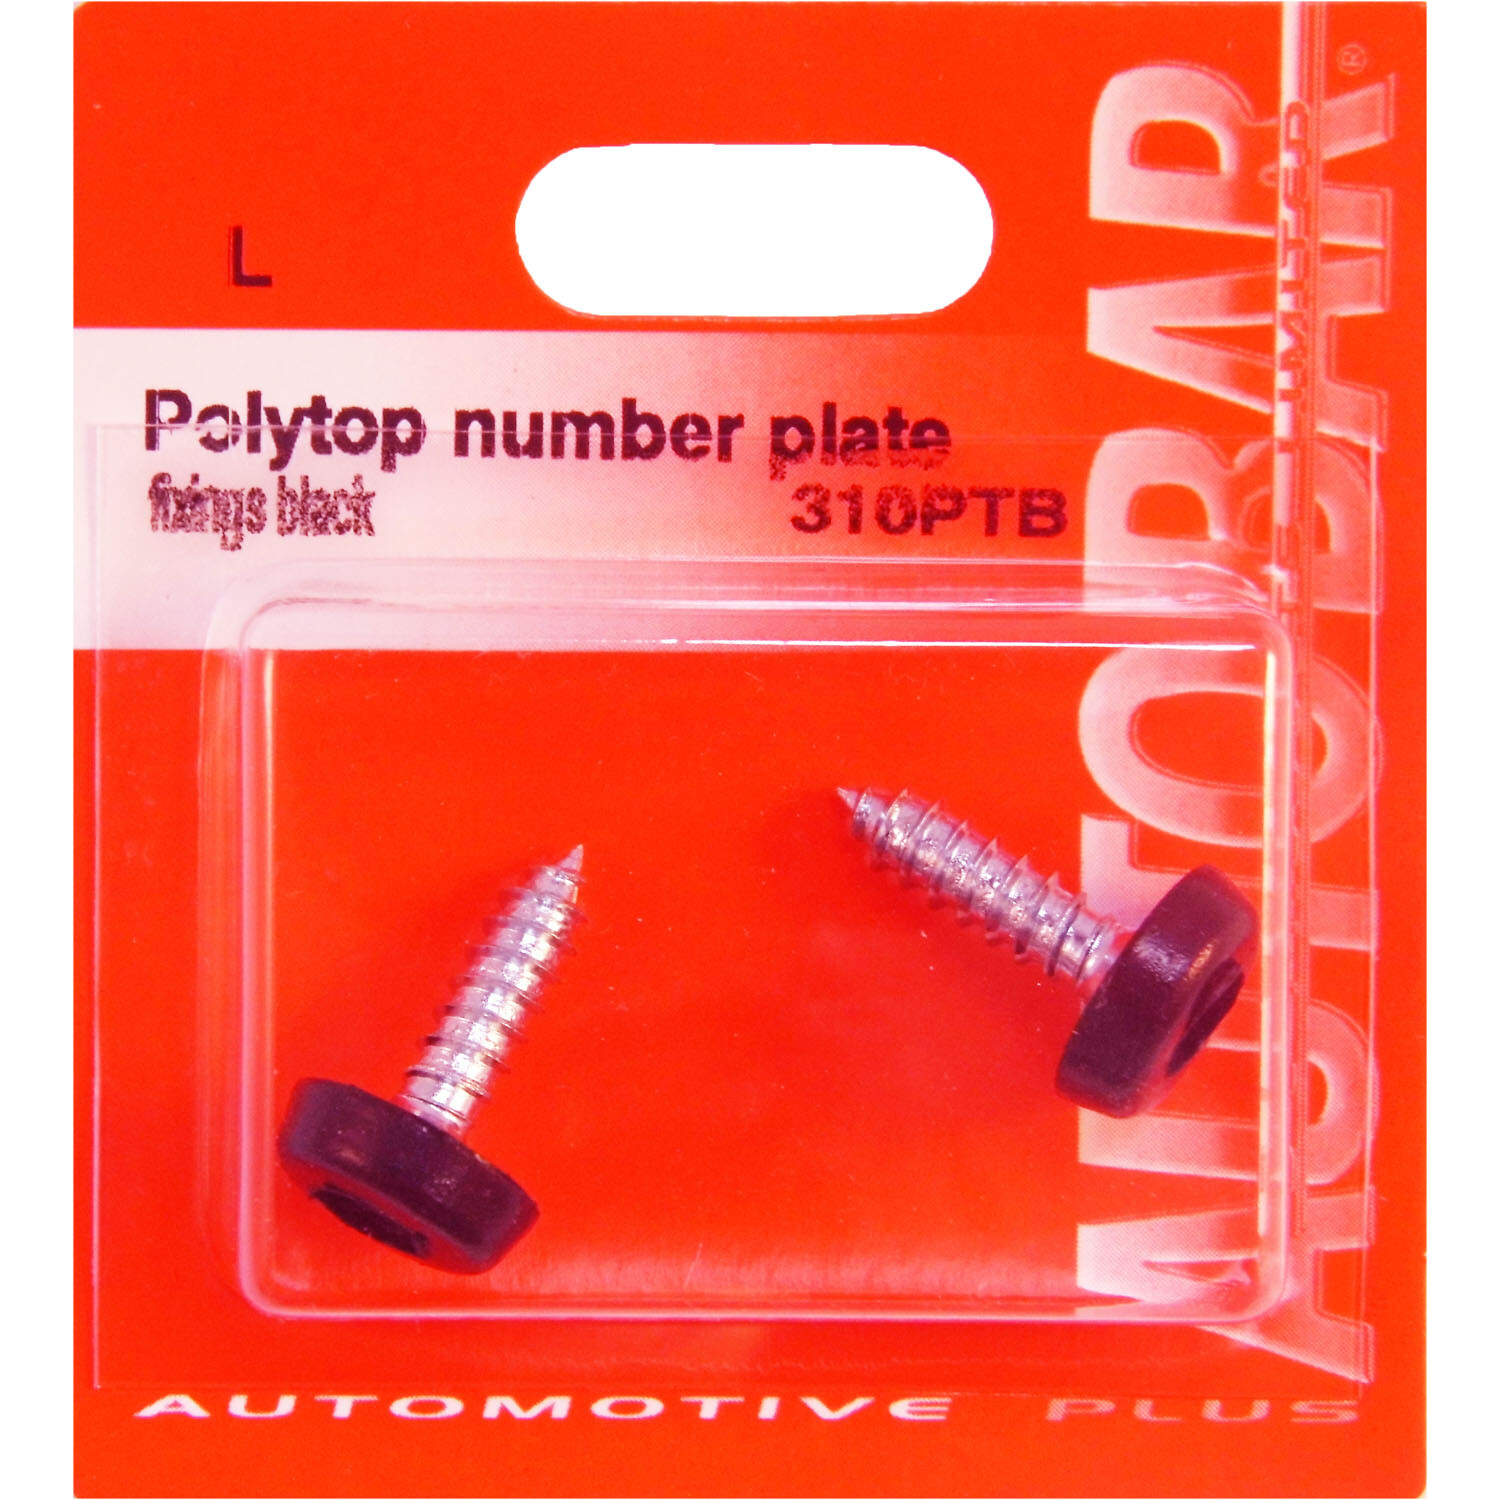 Polytop Number Plate Fittings - Black Image